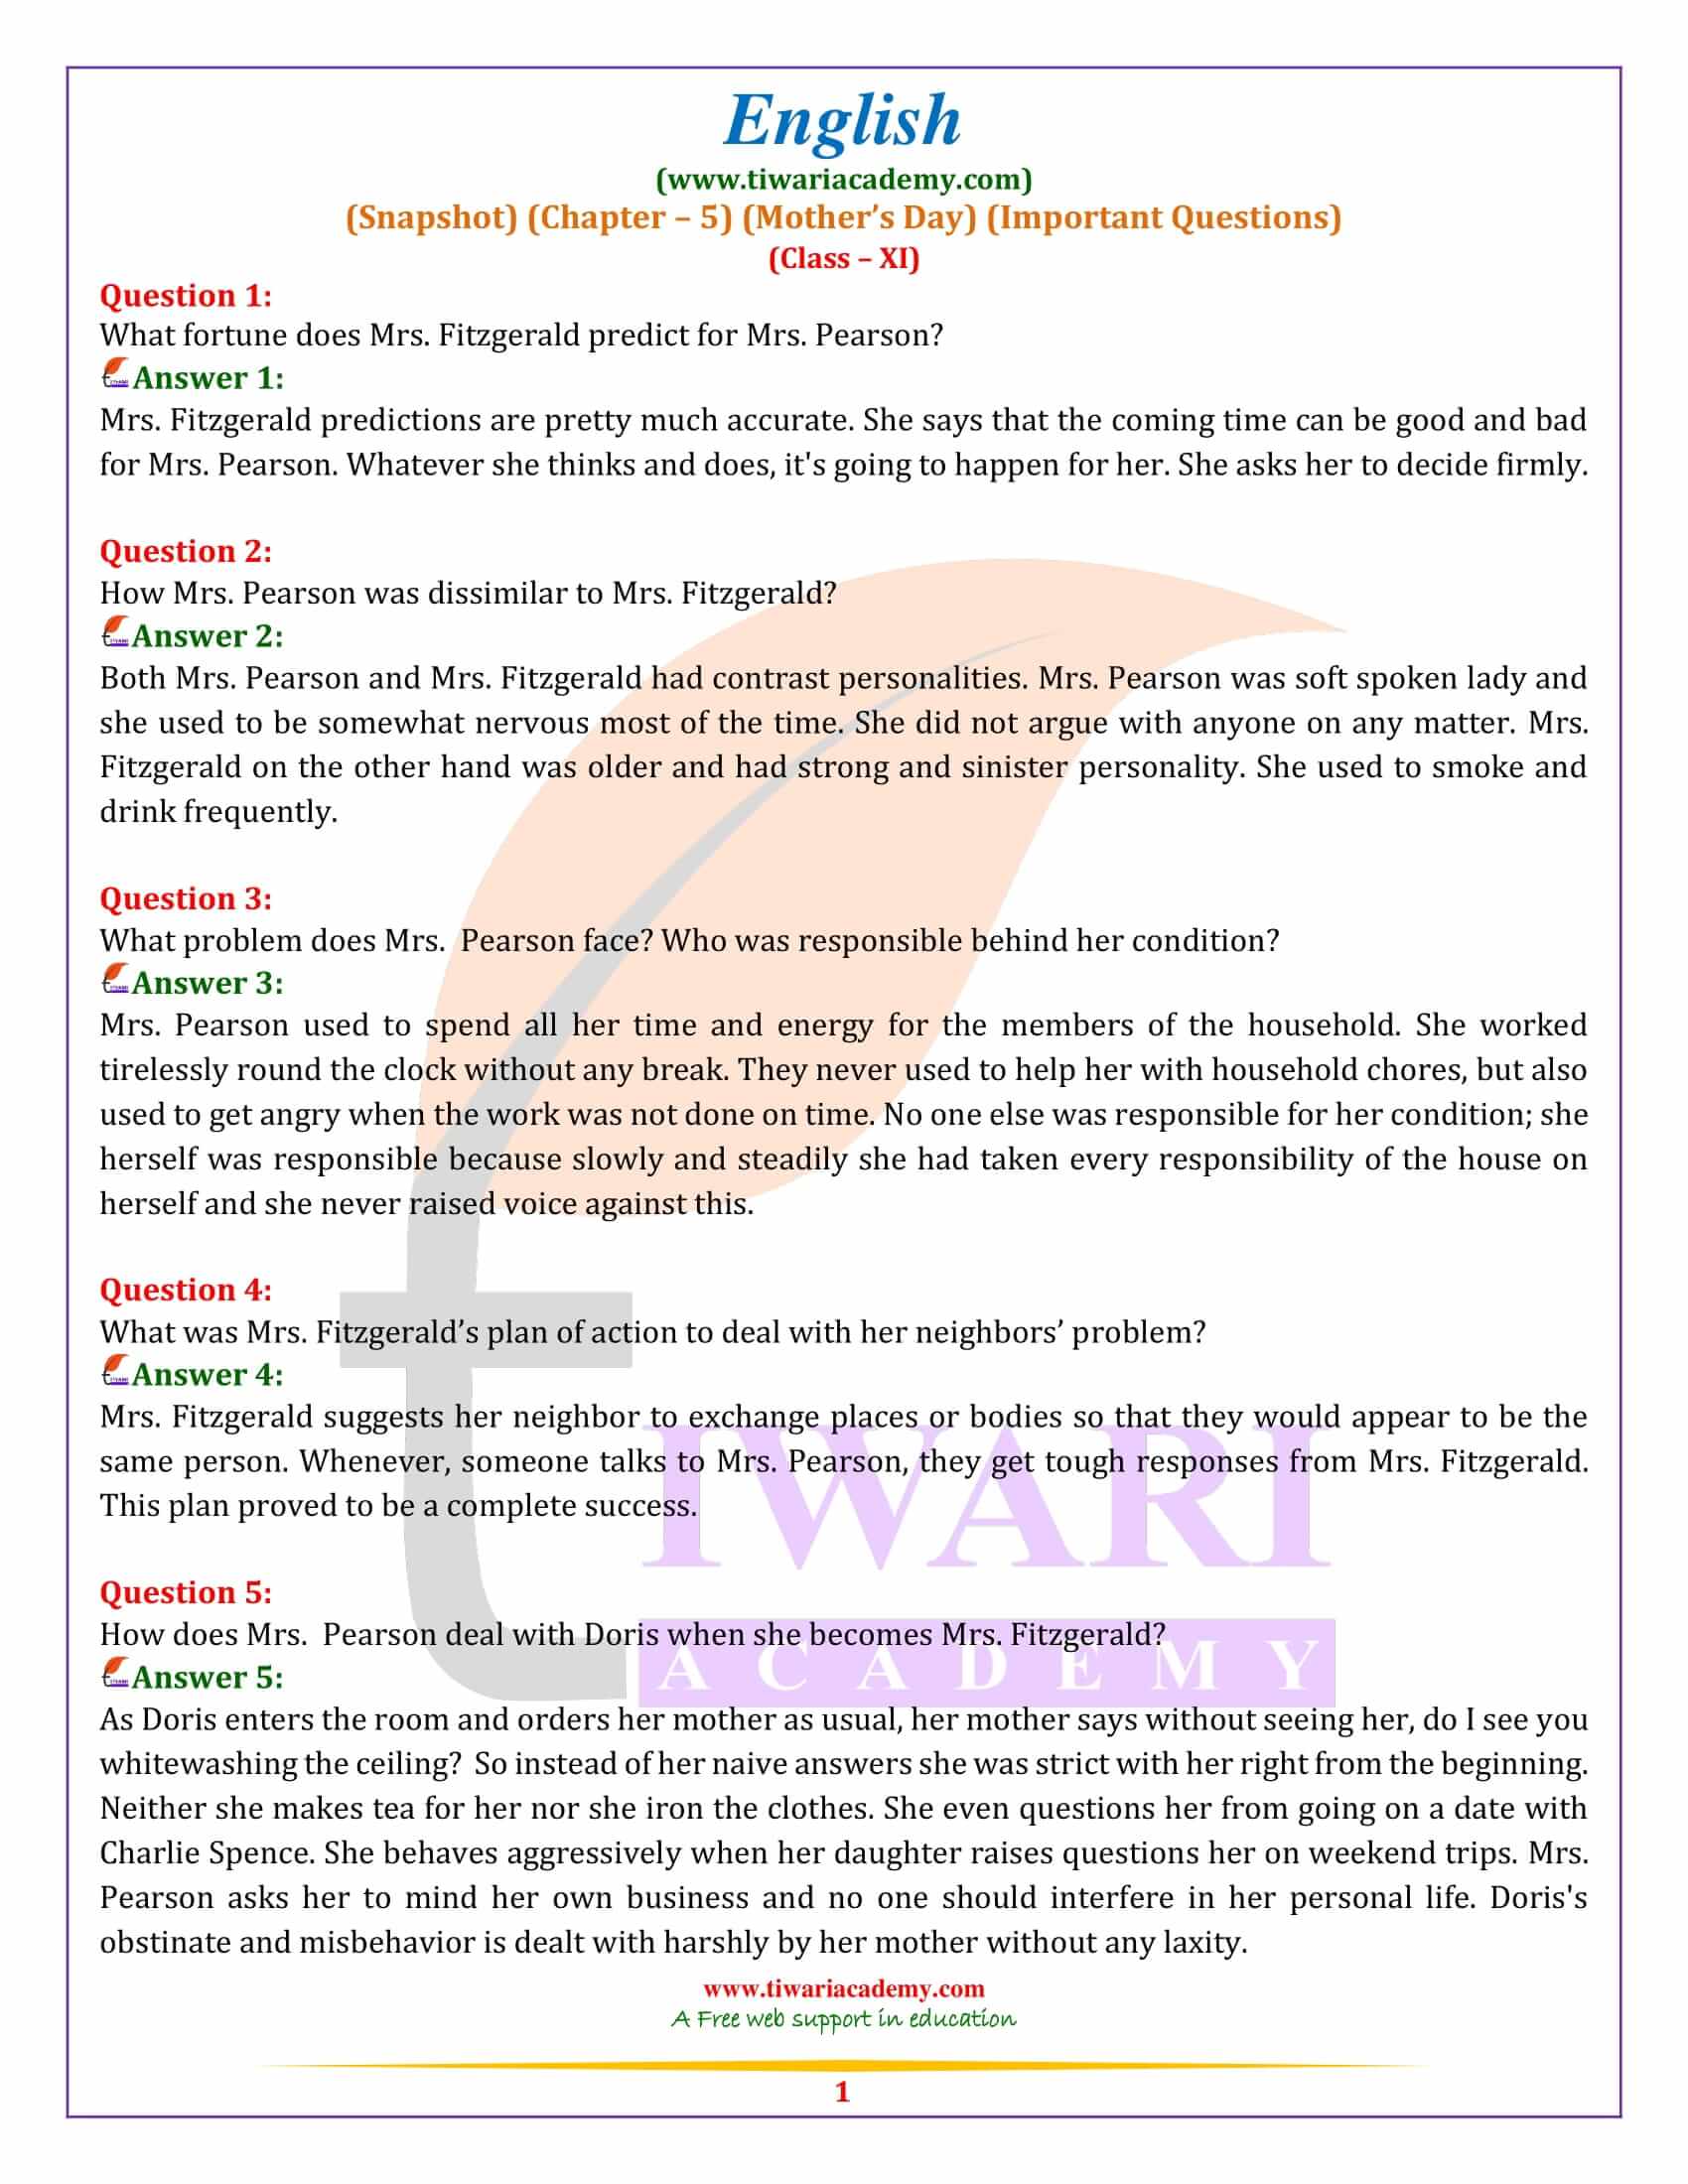 Class 11 English Snapshots Chapter 5 Extra Questions